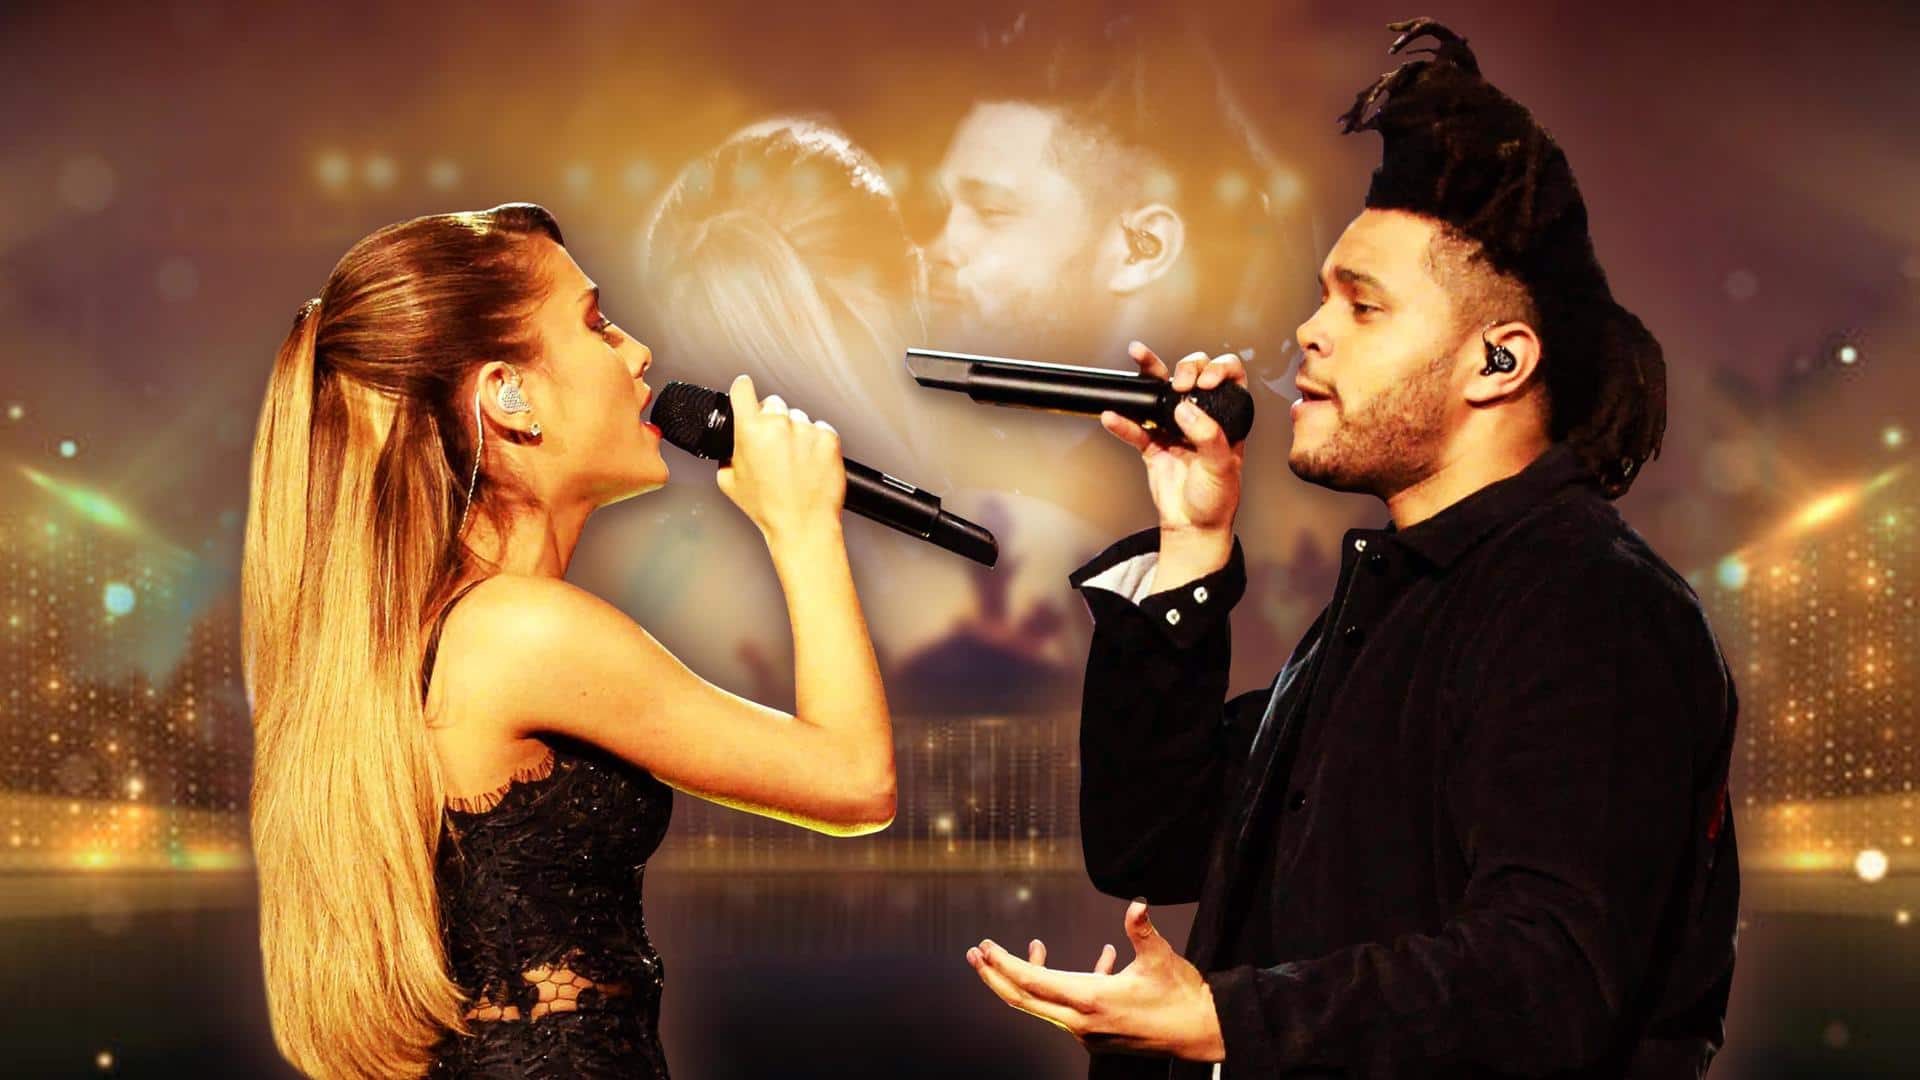 All we know about Ariana Grande's collaboration with The Weeknd